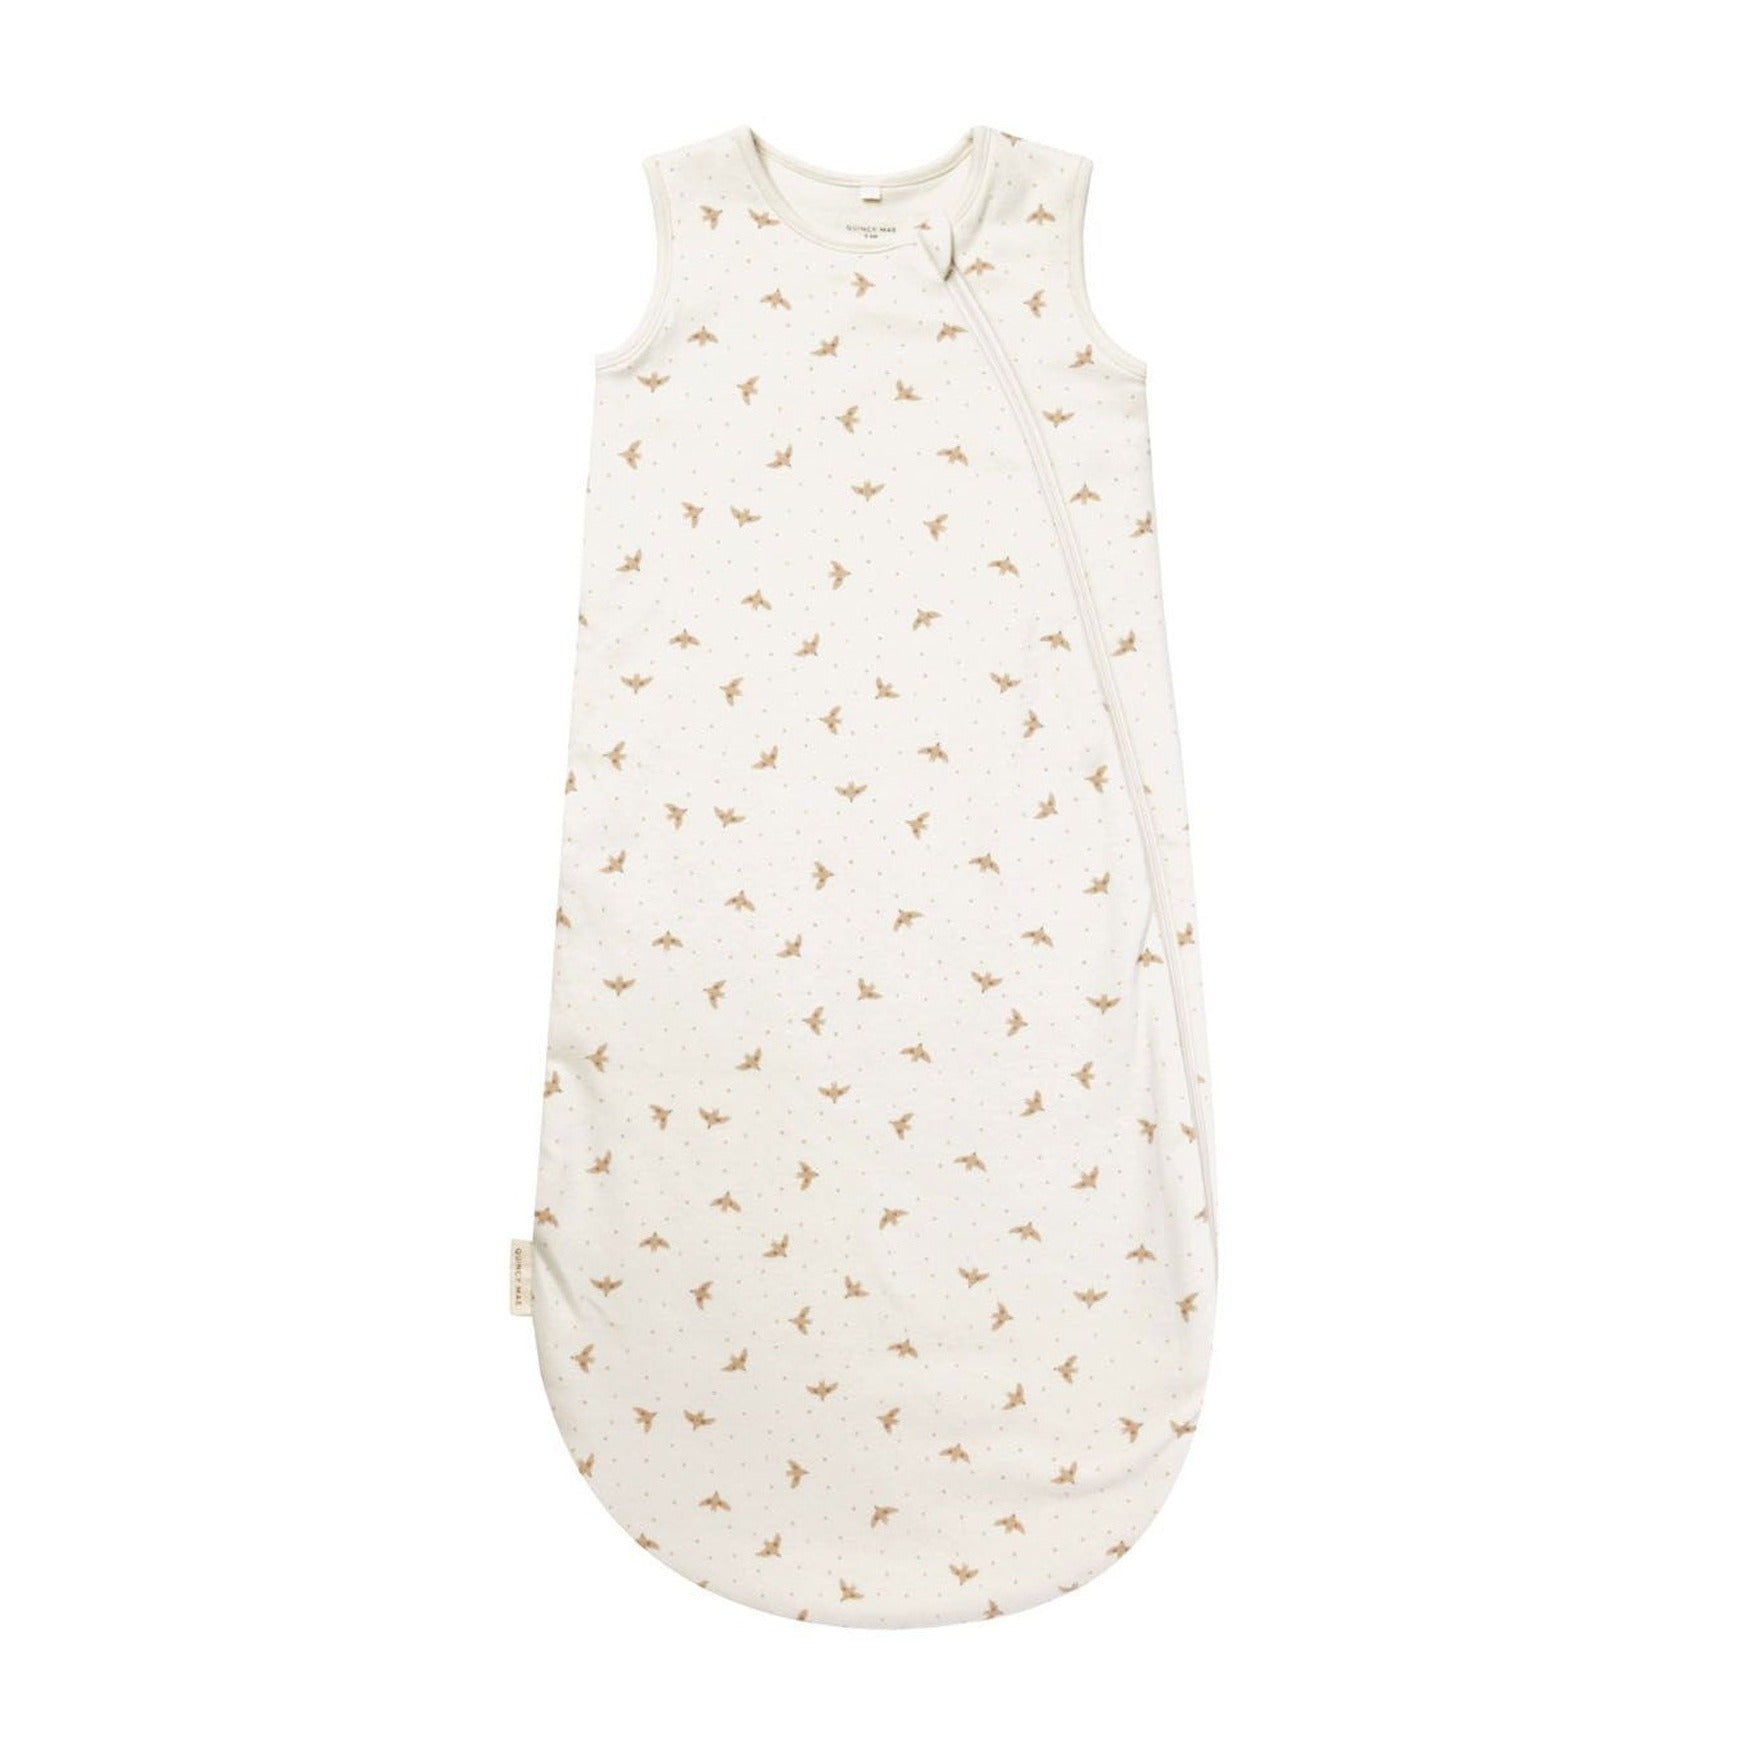 Quincy Mae Jersey Sleeping Bag - Doves - Ivory